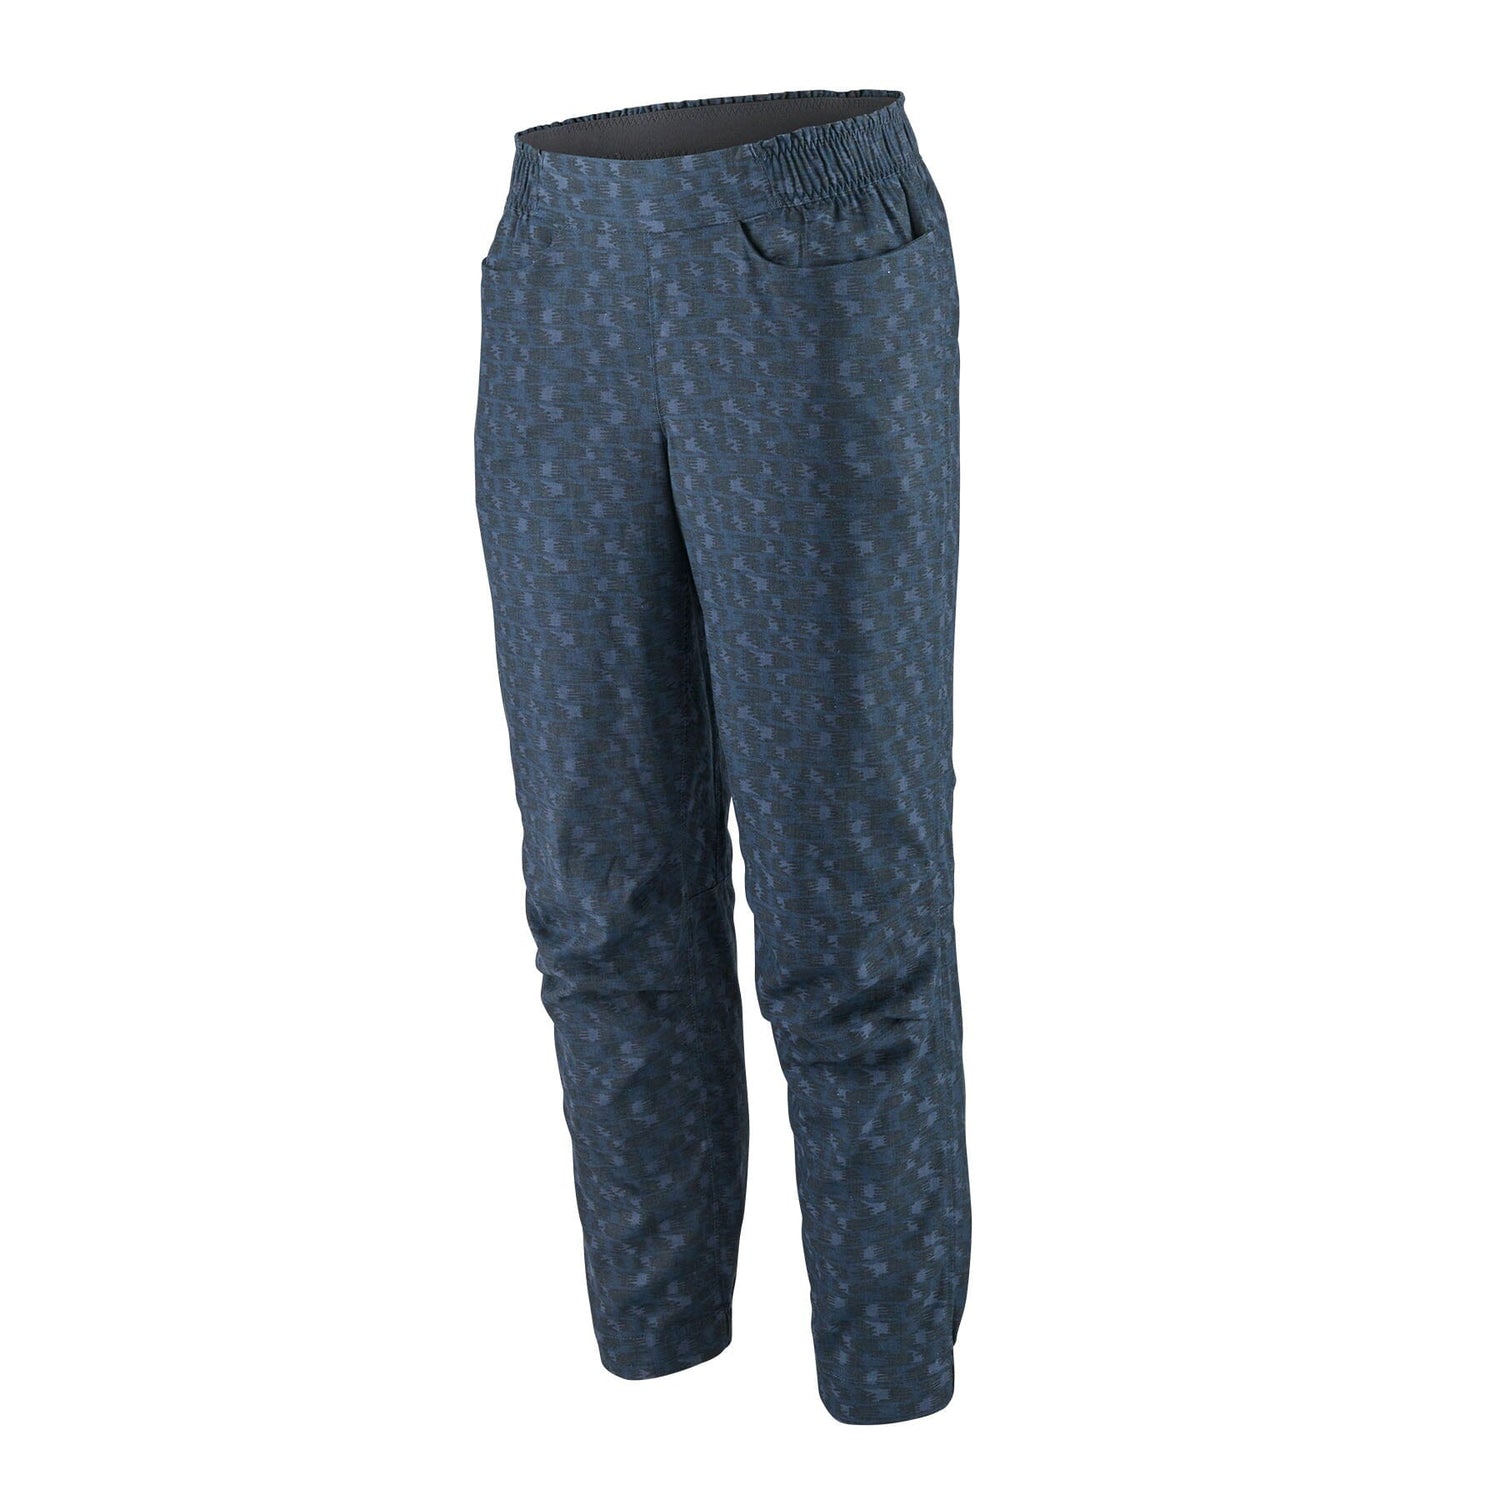 Patagonia W's Hampi Rock Pants - Organic Hemp & Recycled Polyester Intertwined Hands: Smolder Blue Pants